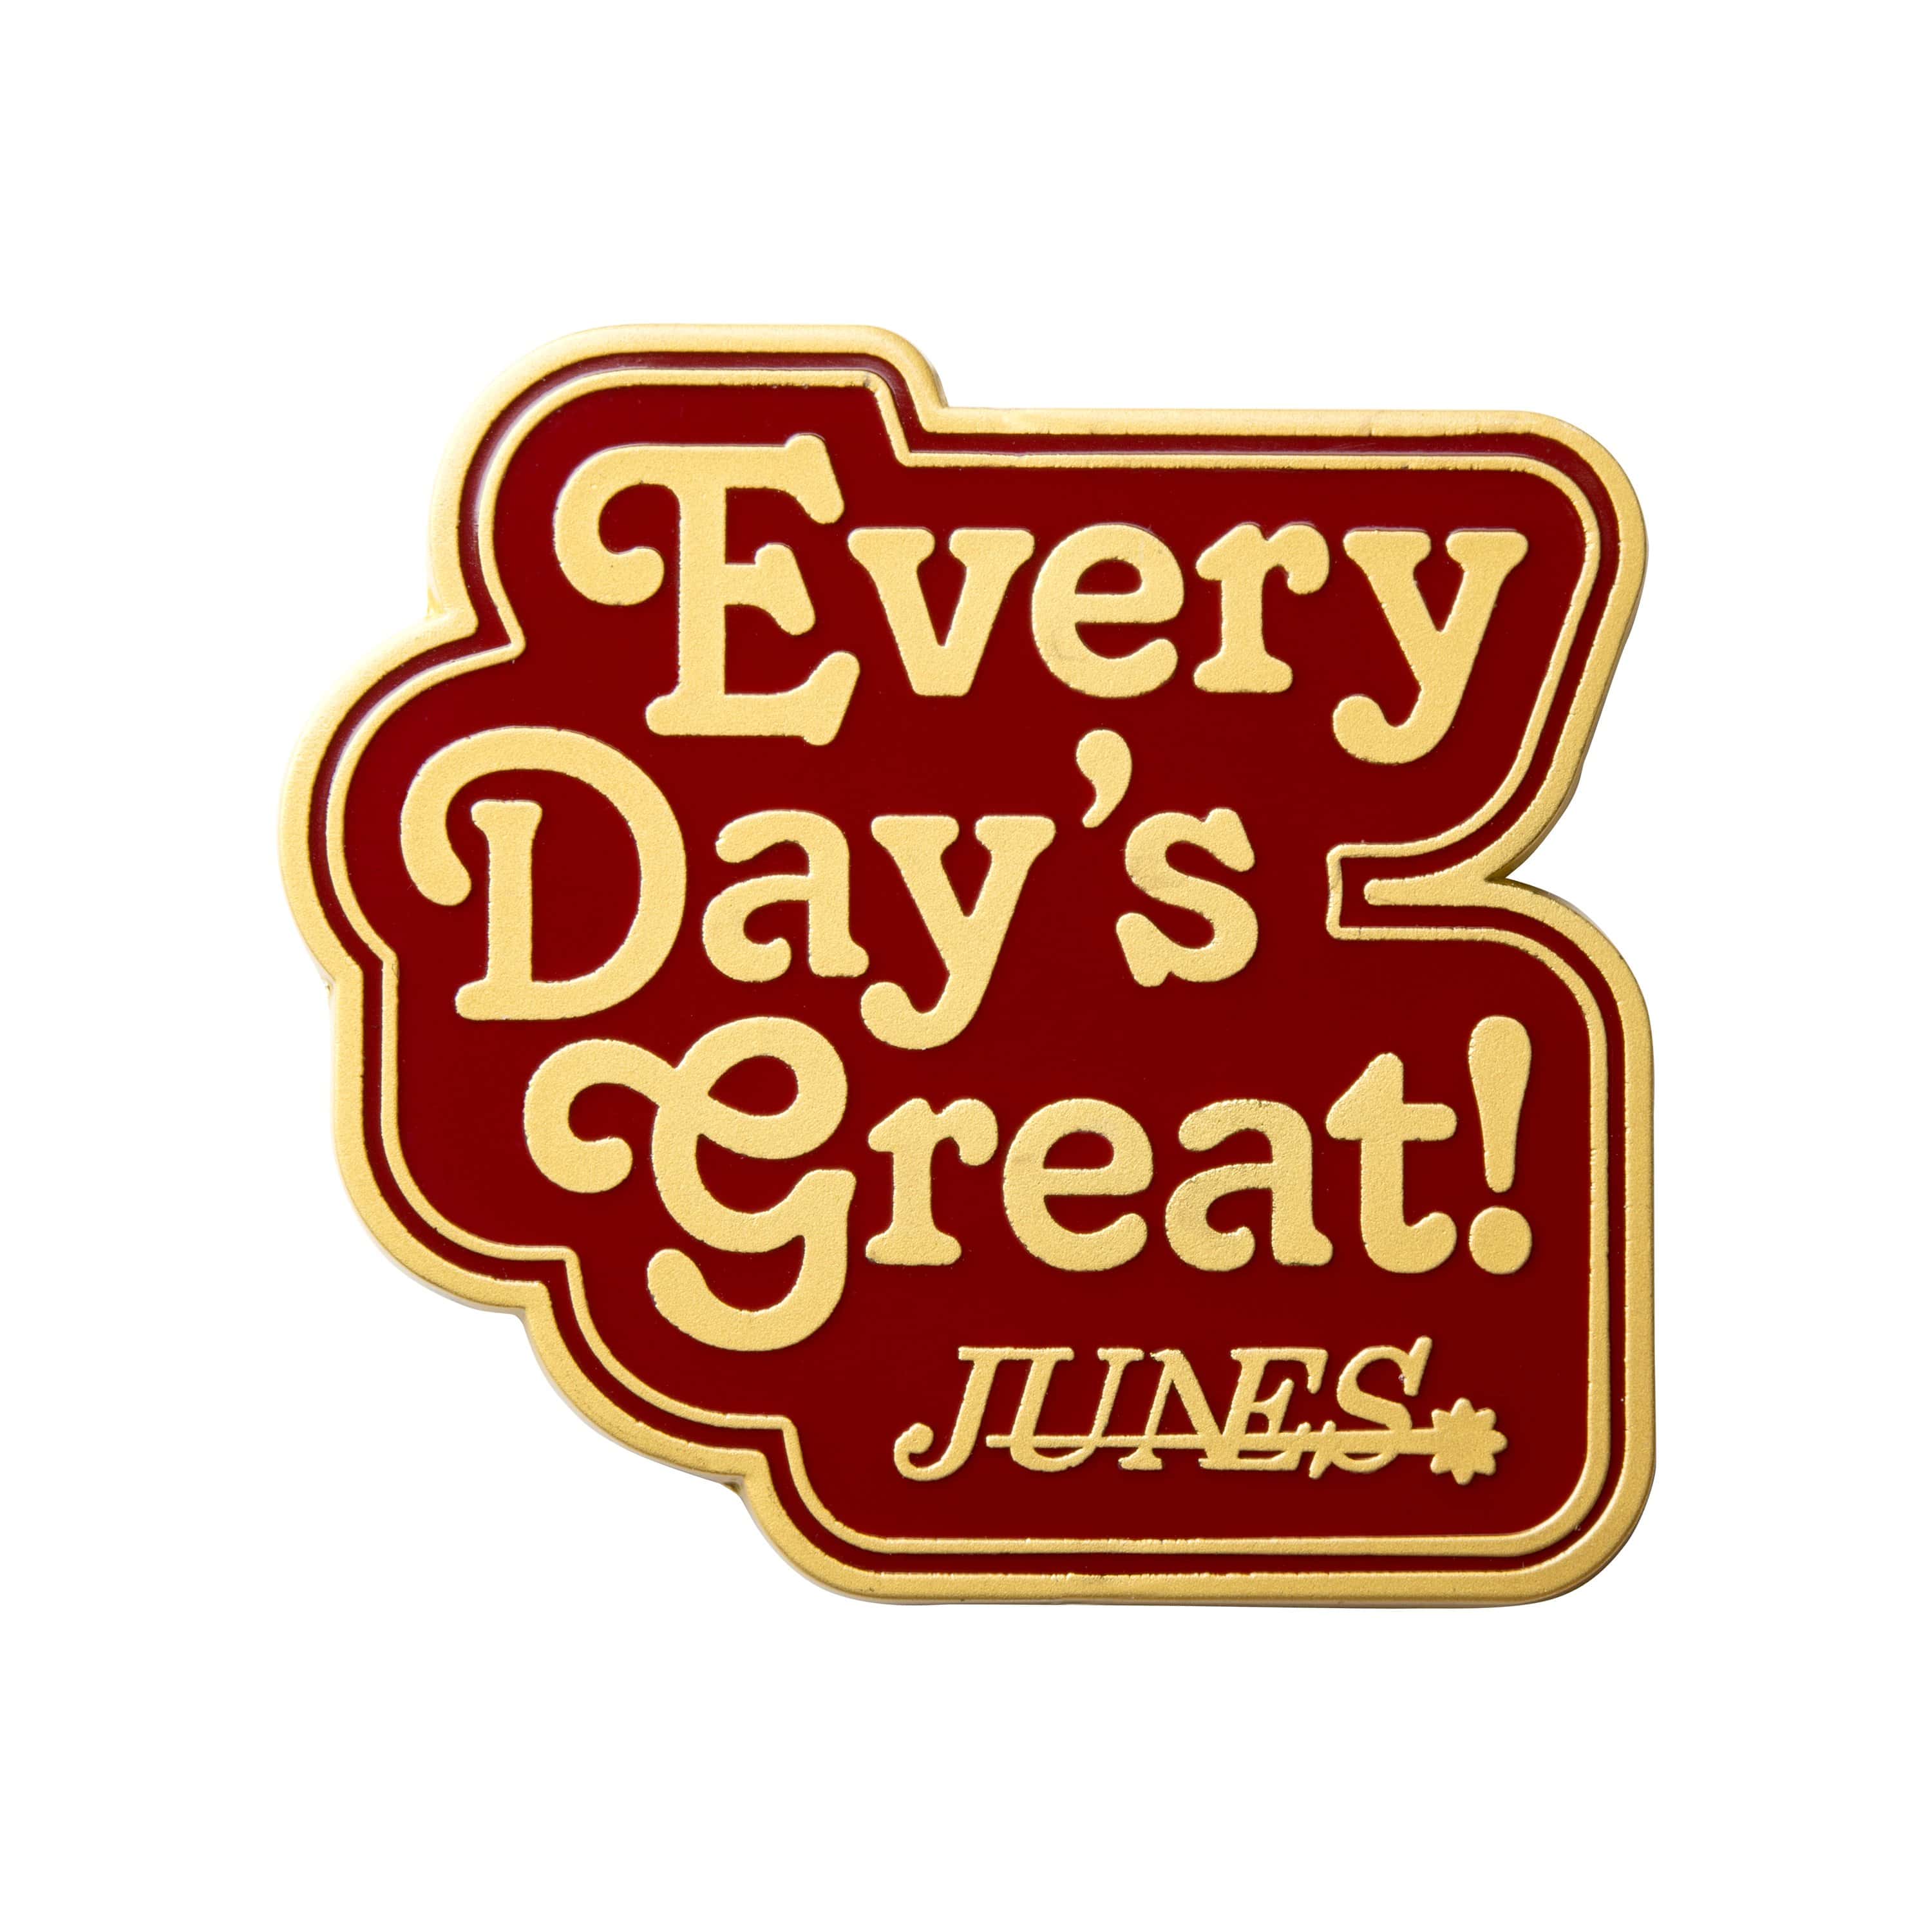 Persona 4 - Every Day's Great Junes Brass Plated Enamel Pin